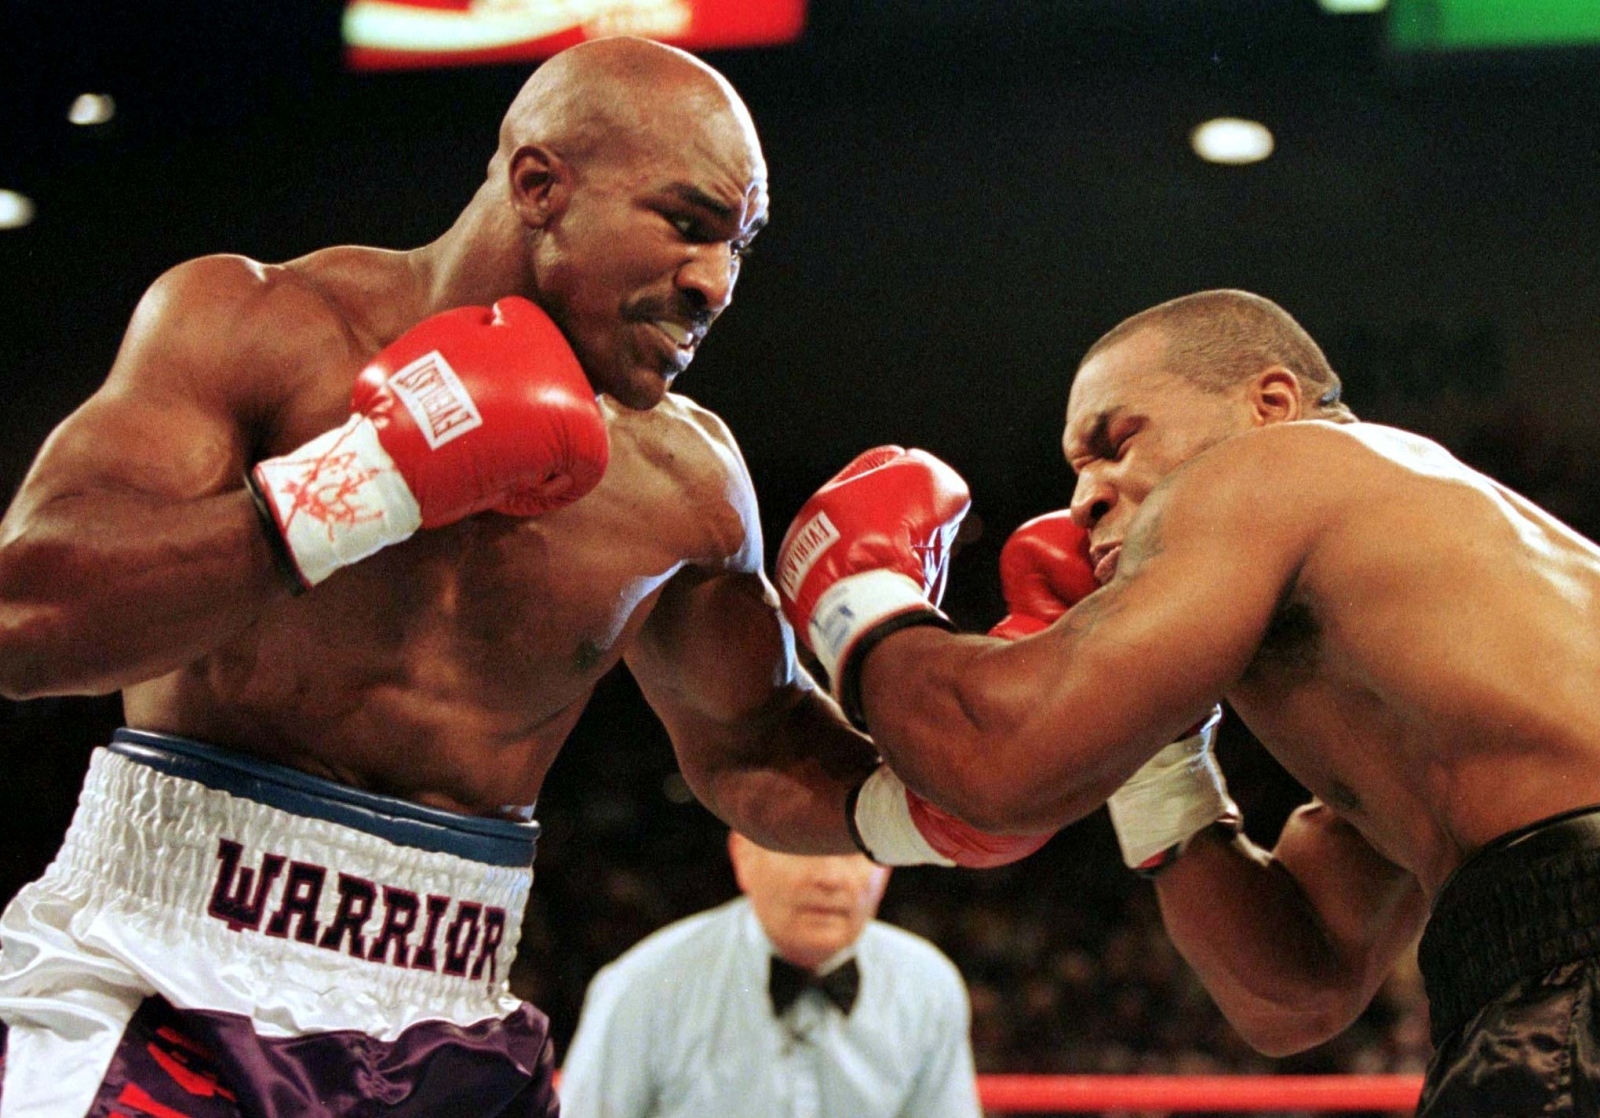 FILE PHOTO: WBA Heavyweight Champion Evander Holyfield (R) connects to the jaw of challenger Mike Tyson in the f.. FILE PHOTO: WBA Heavyweight Champion Evander Holyfield (R) connects to the jaw of challenger Mike Tyson in the first round of their title fight June 28.  Evander Holyfied retained his World Boxing Association heavyweight title on Saturday night when Mike Tyson was disqualified for biting Holyfield twice in the third round./File Photo Gary Hershorn